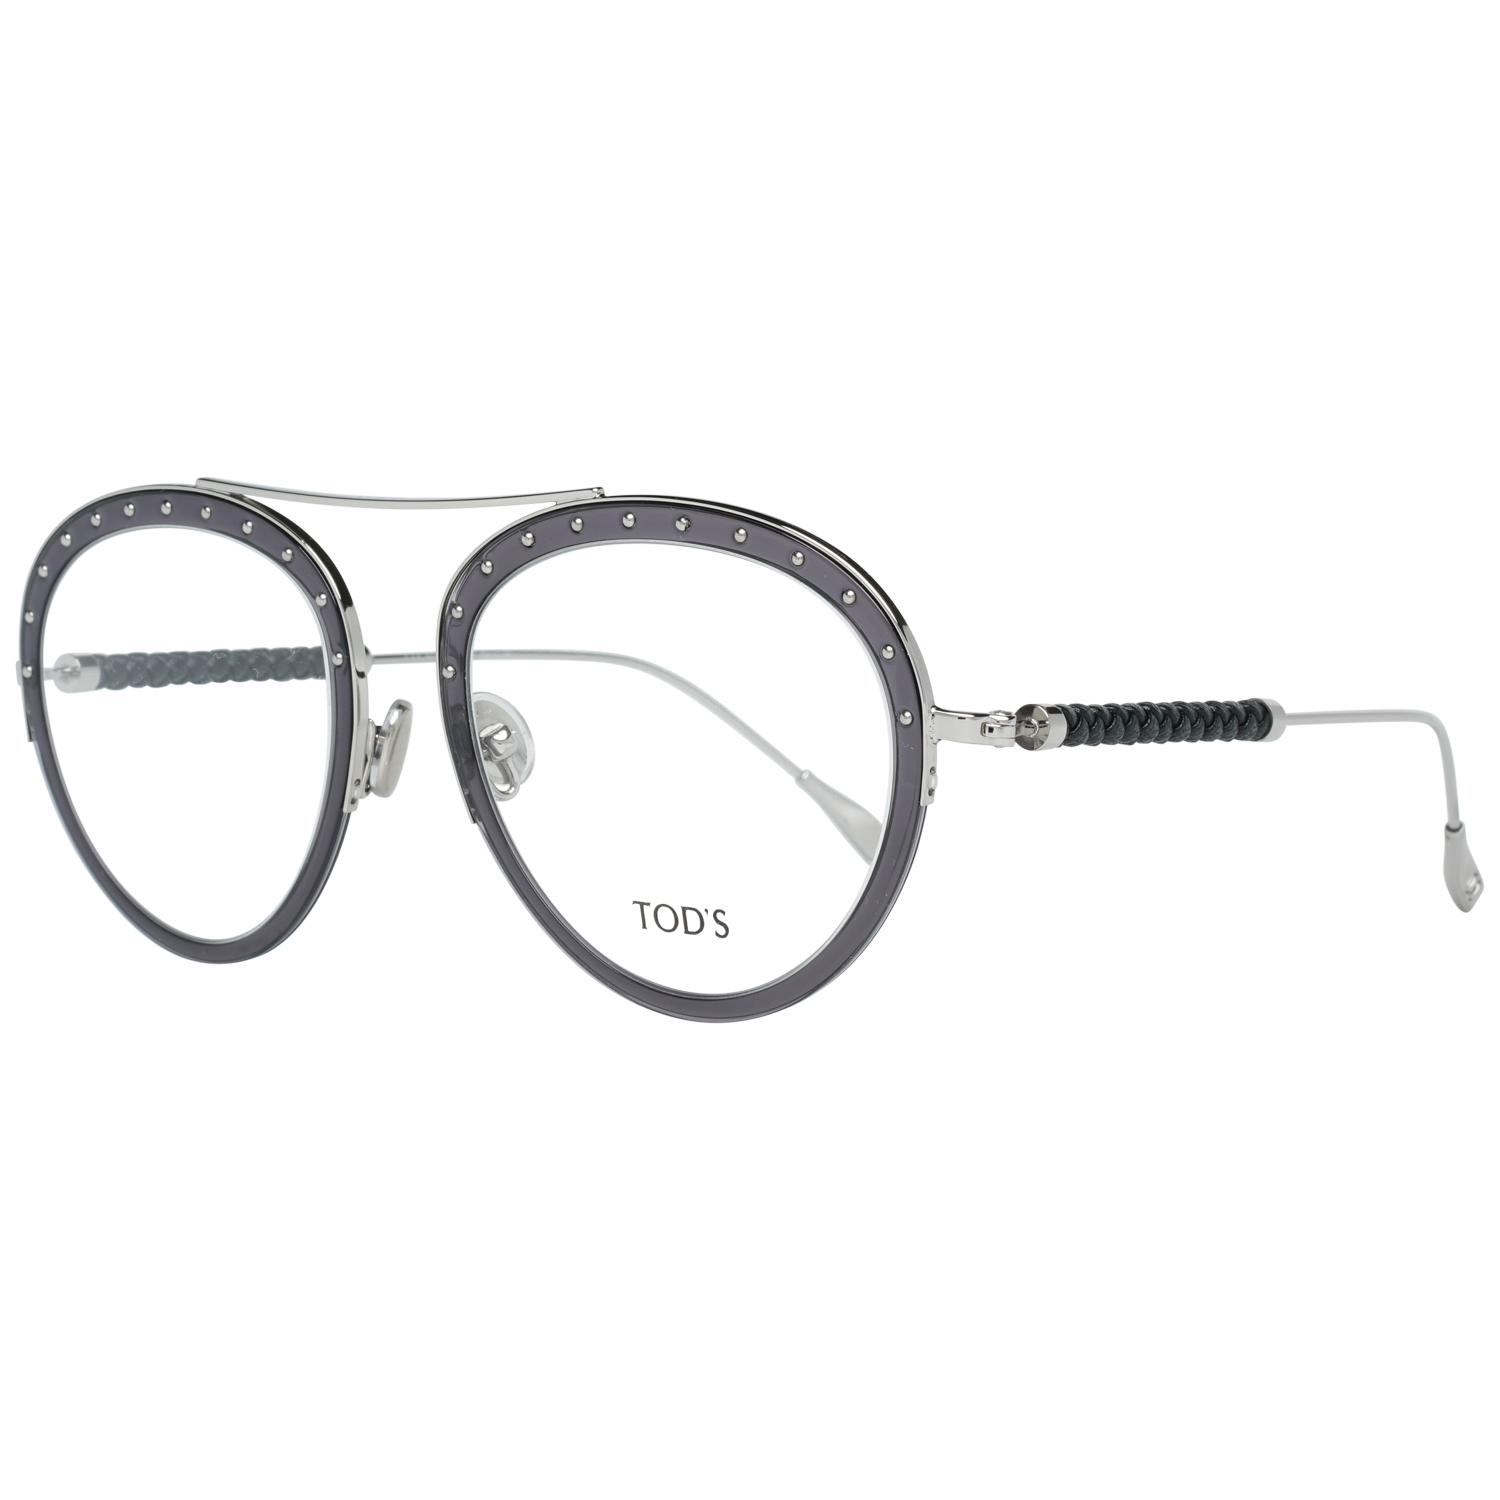 Tods Optical Frame TO5211 001 52 Grey